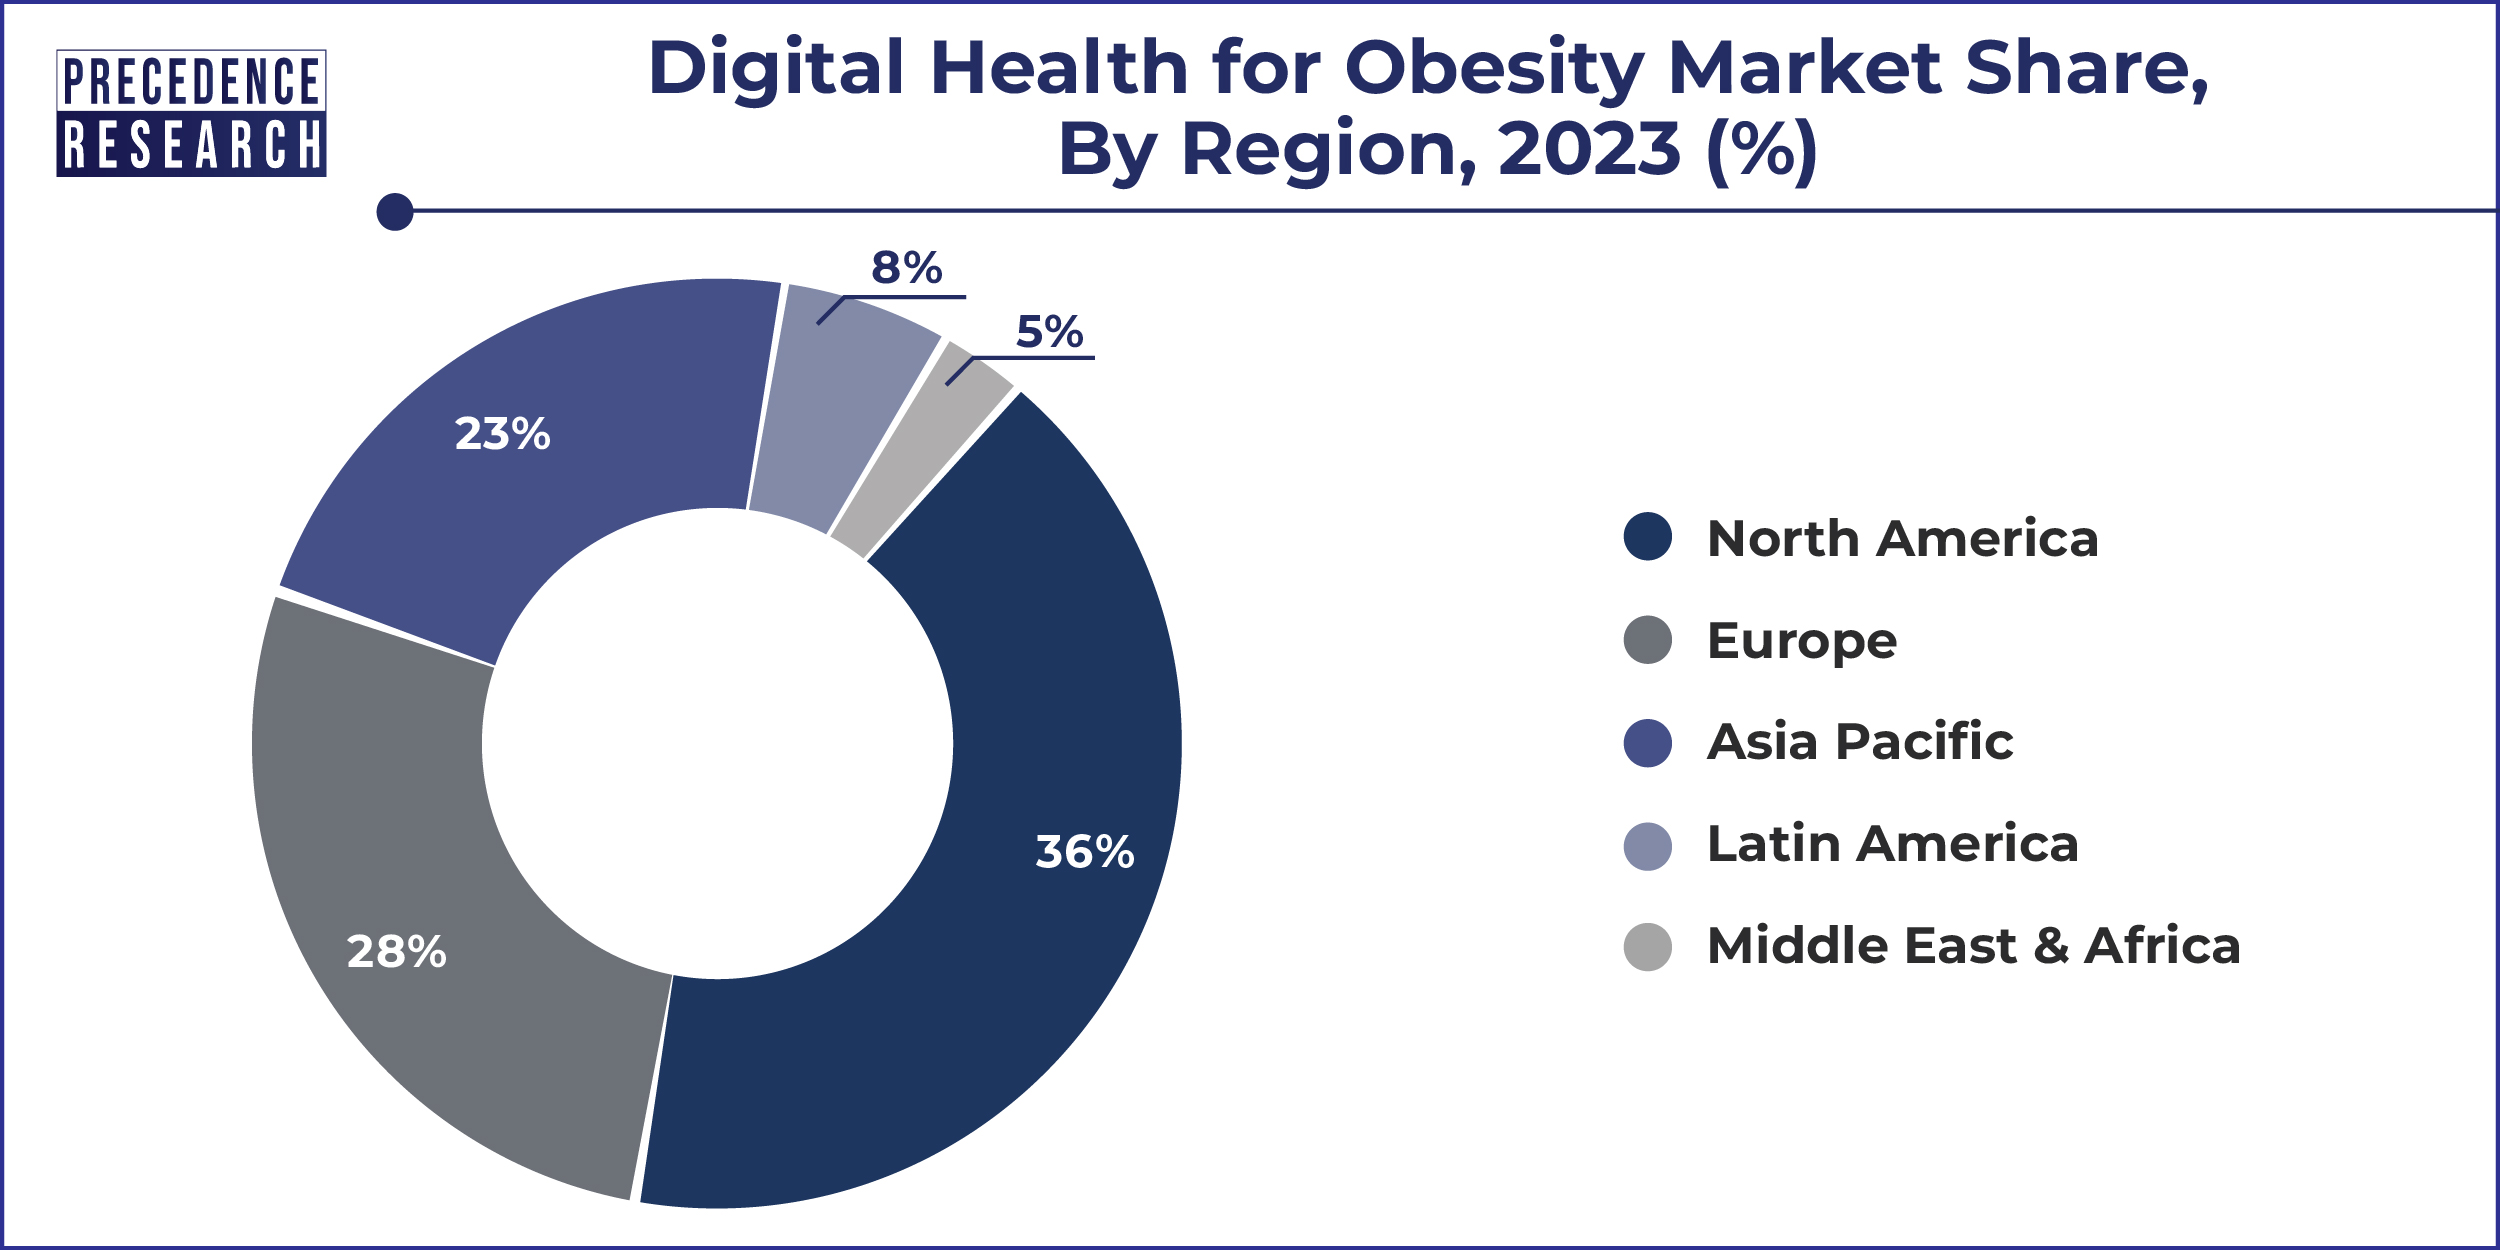 Digital Health for Obesity Market Share, By Region, 2023 (%)